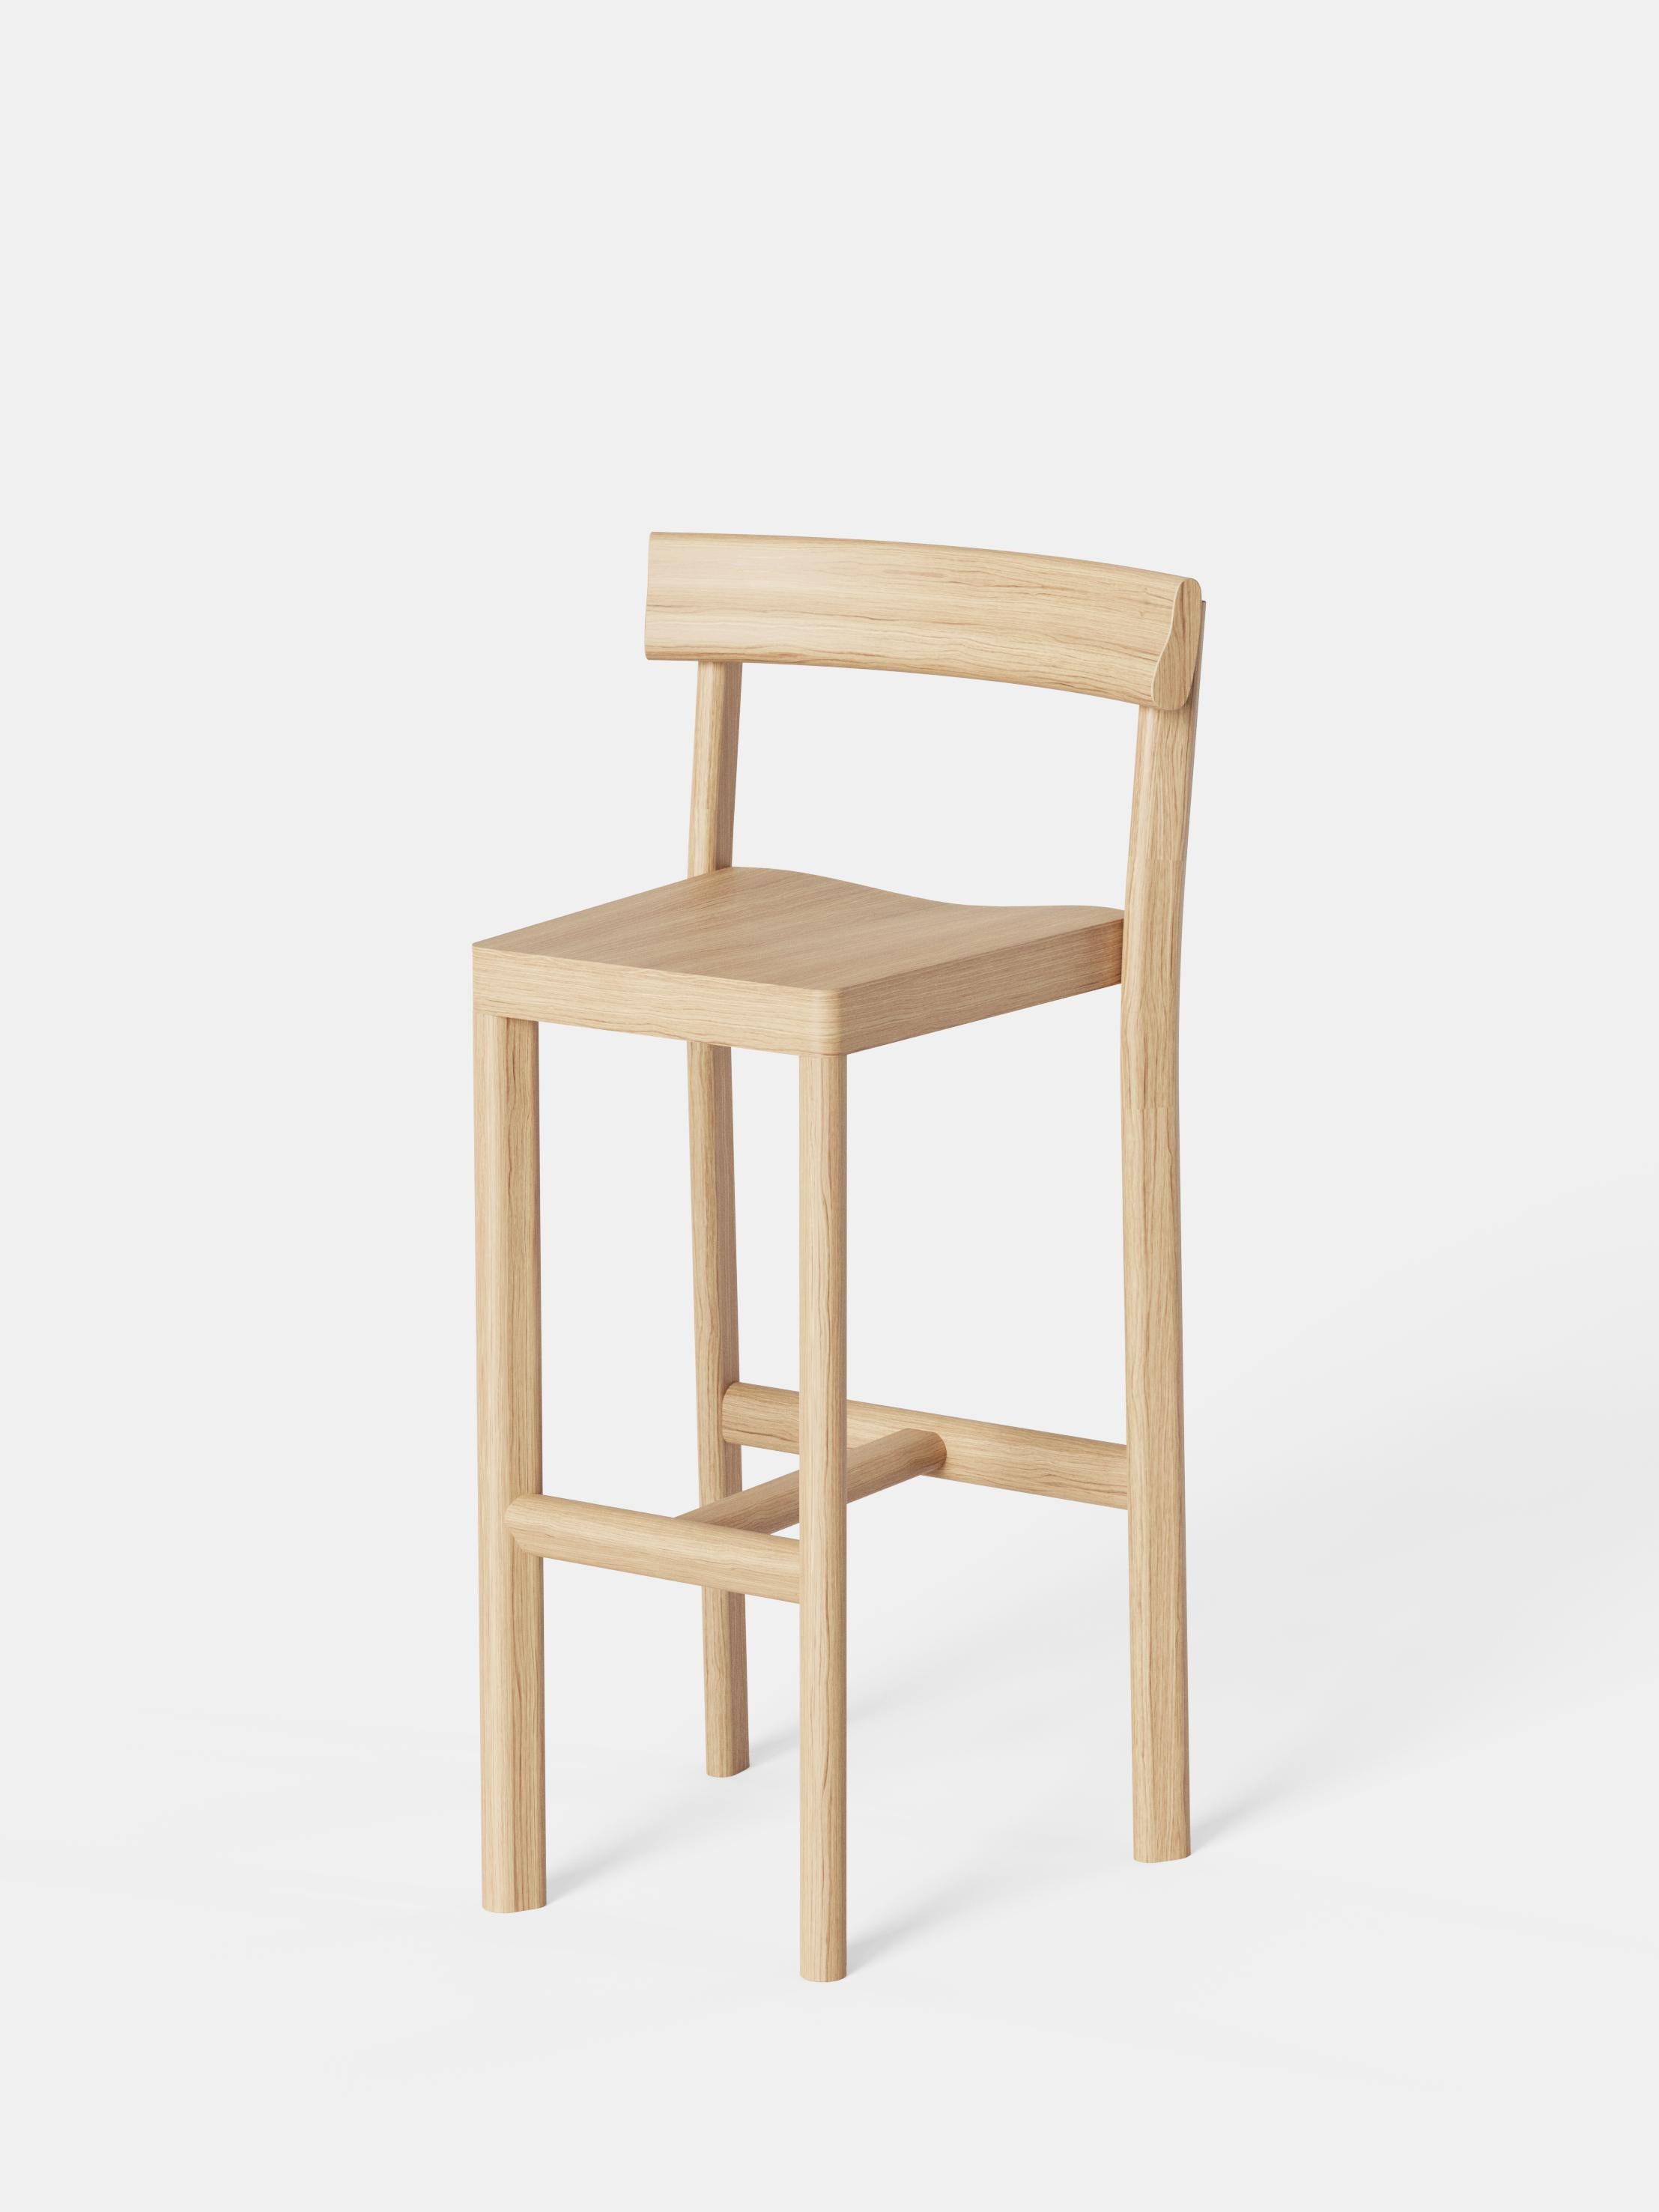 Set of 6 Galta 75 Oak Counter Chairs by Kann Design
Dimensions: D 50 x W 43 x H 101.5 cm.
Materials: Natural oak.
Available in other colors.

The Galta counter chair is the big sister of the classic Galta chair. The base stretches and reveals the